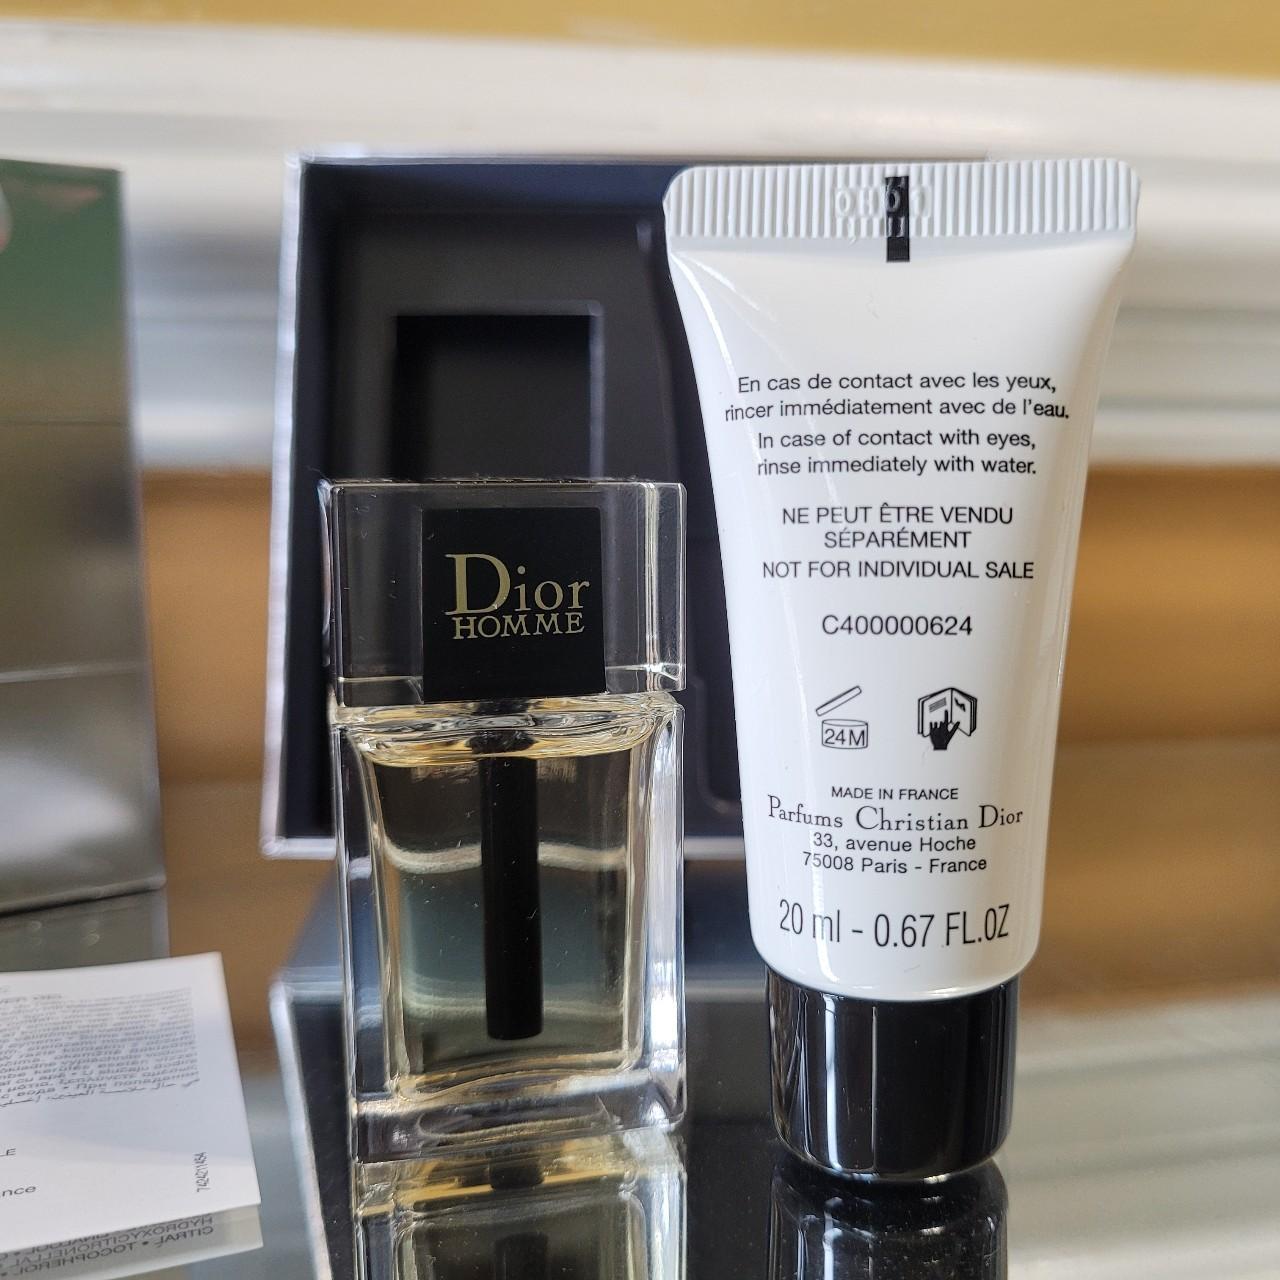 Product Image 4 - Dior homme gift set brand